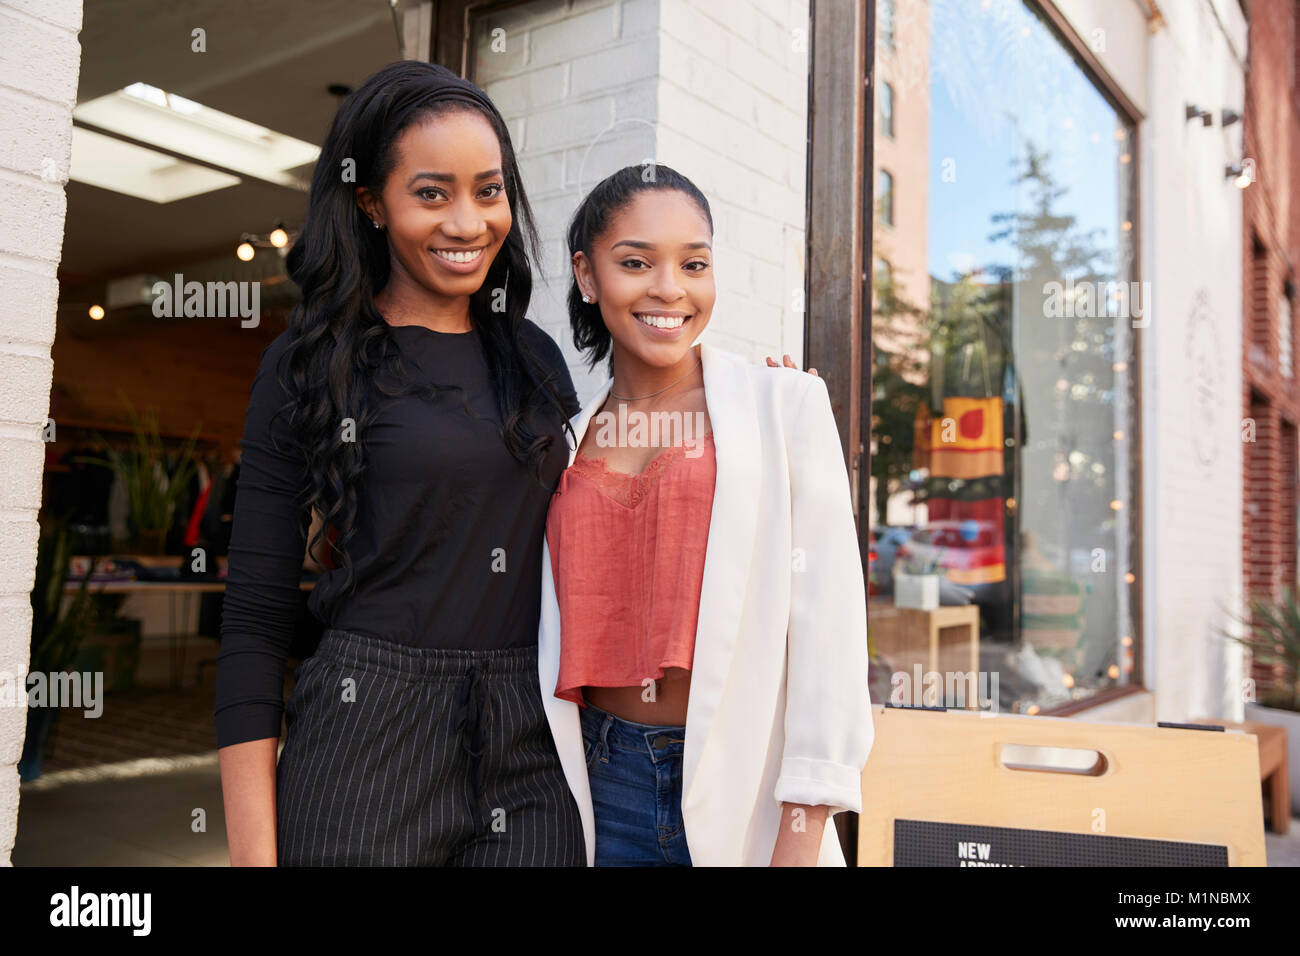 Two young women smiling to camera outside their clothes shop Stock Photo